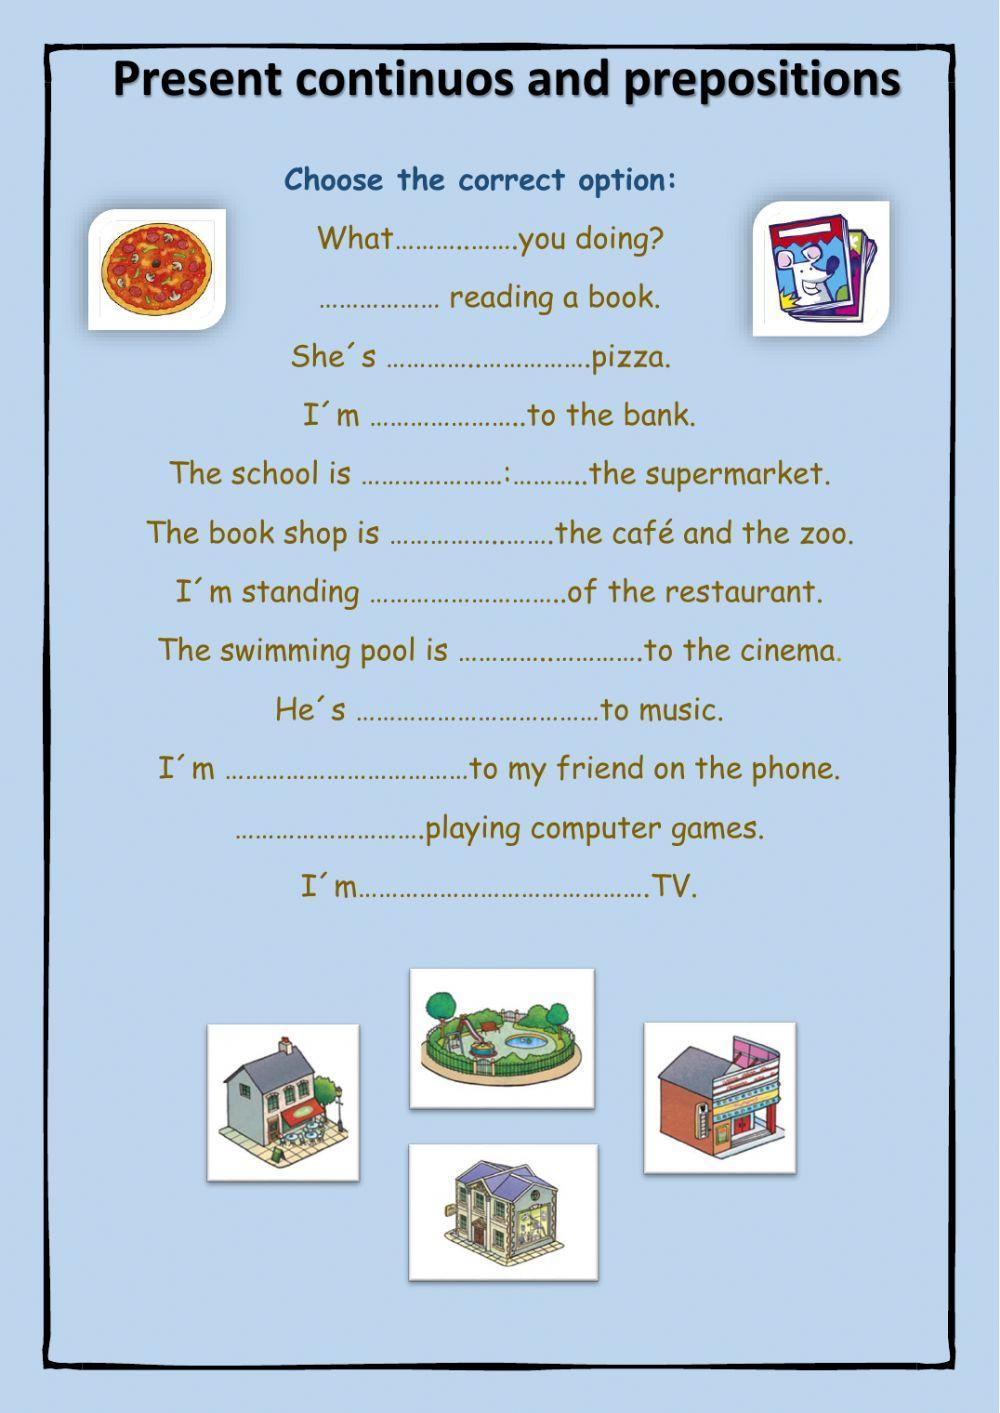 Present continuous and prepositions